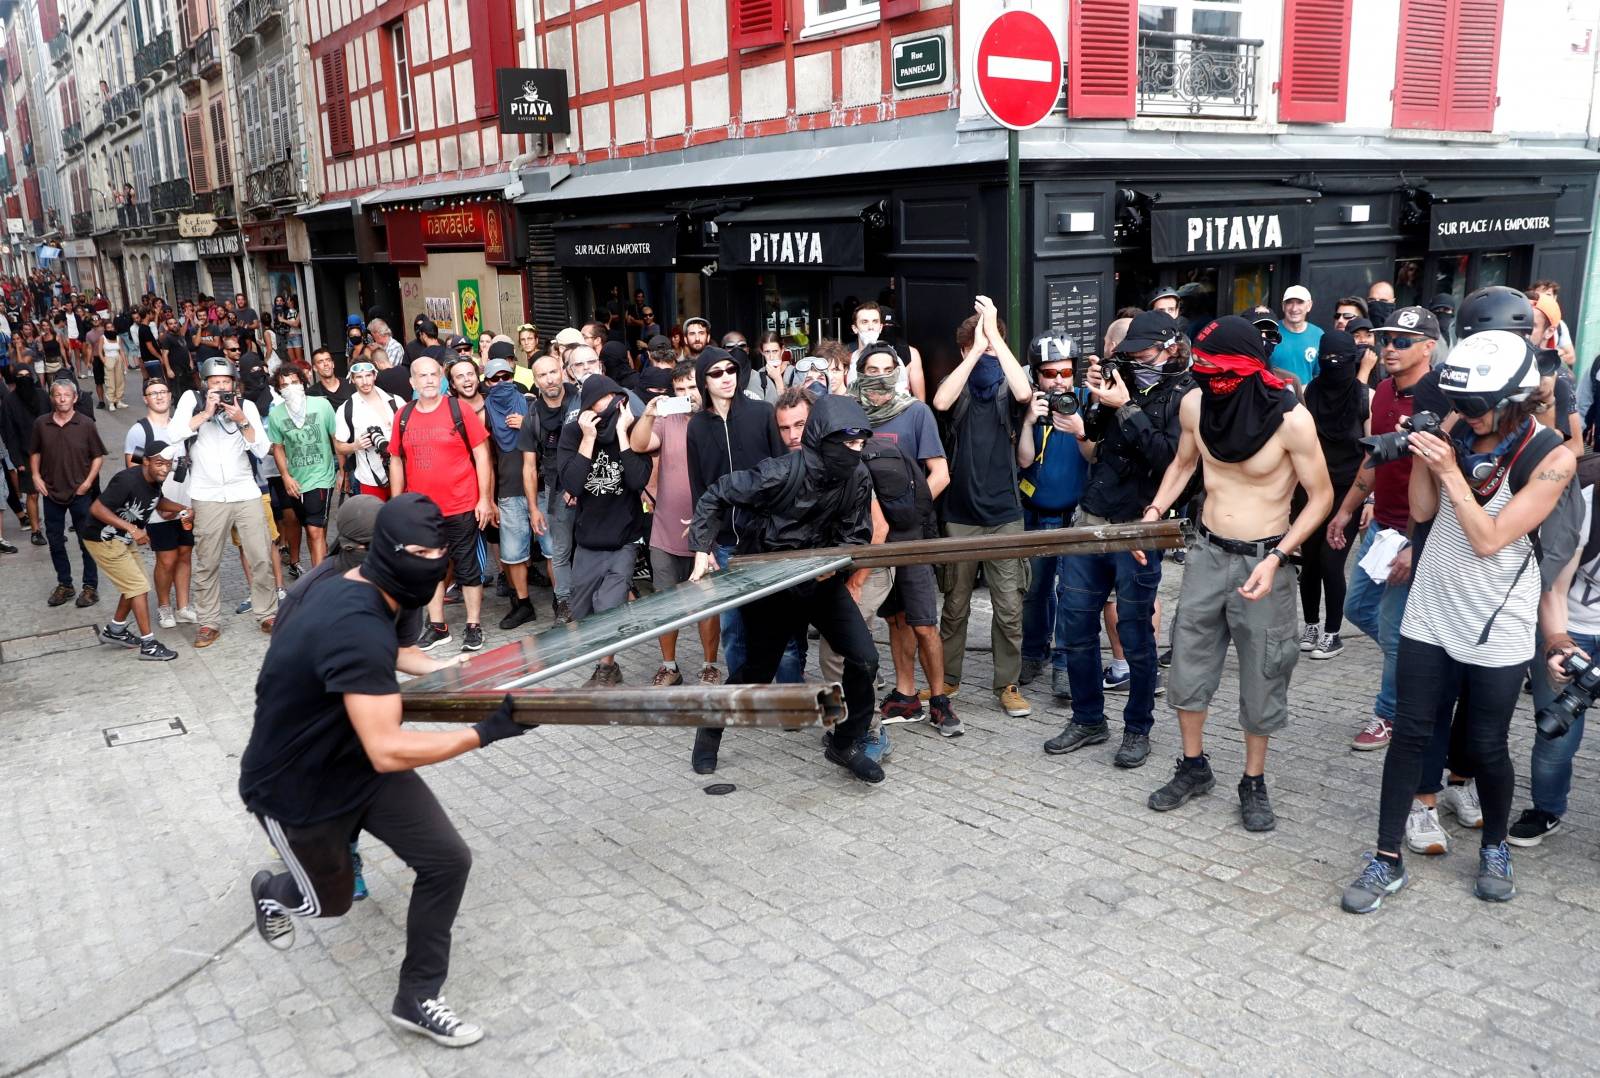 Demonstrators throw a part of a barricade at a police blockade during a protest against G7 summit, in Bayonne